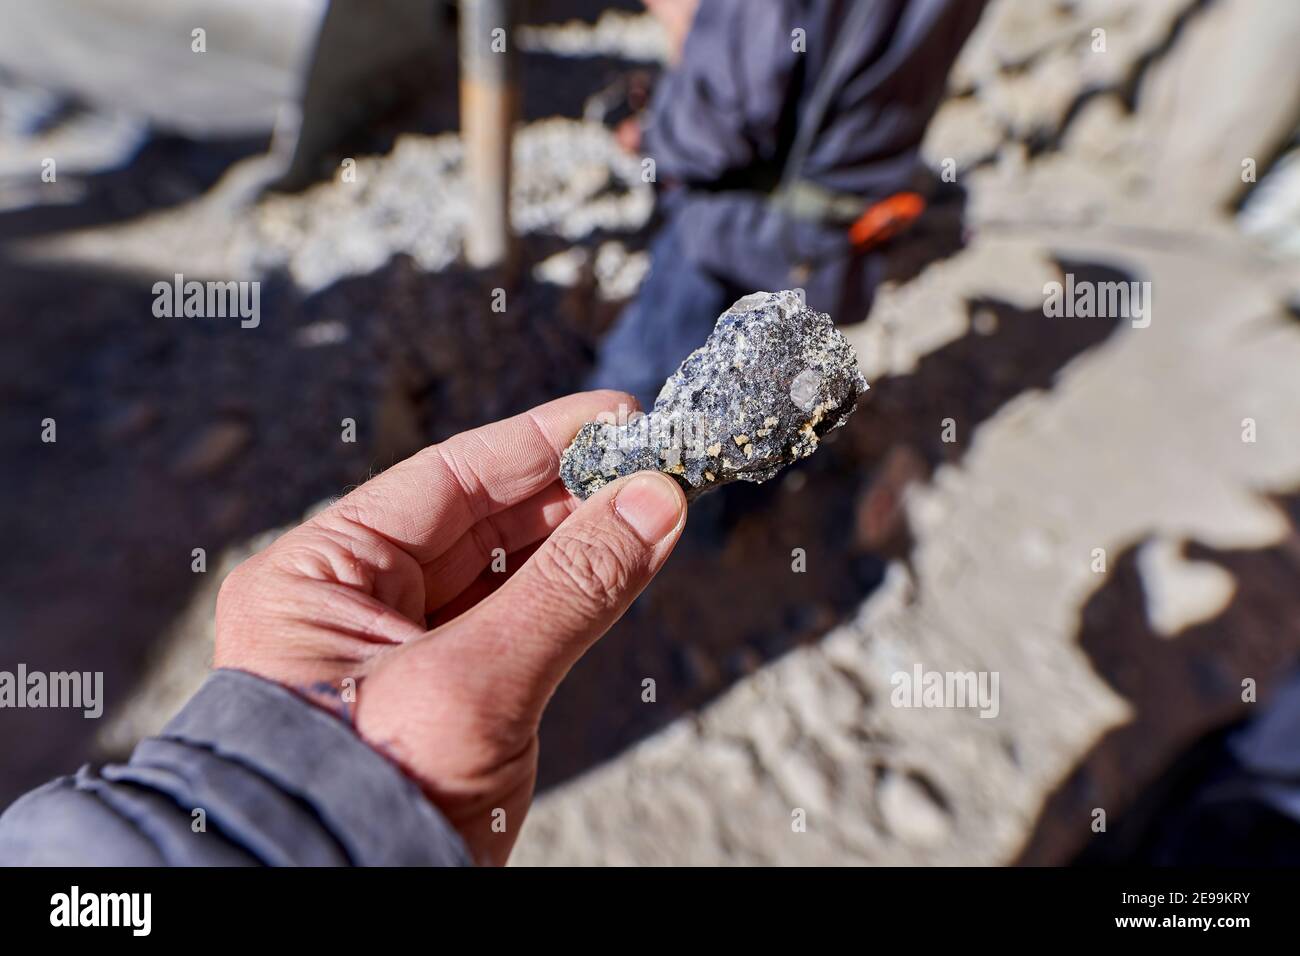 silver ore in shape of a small rock that needs to be processed to generate pure silver. Silver mining in Potosi in the andes mountains of Bolivia, Sou Stock Photo